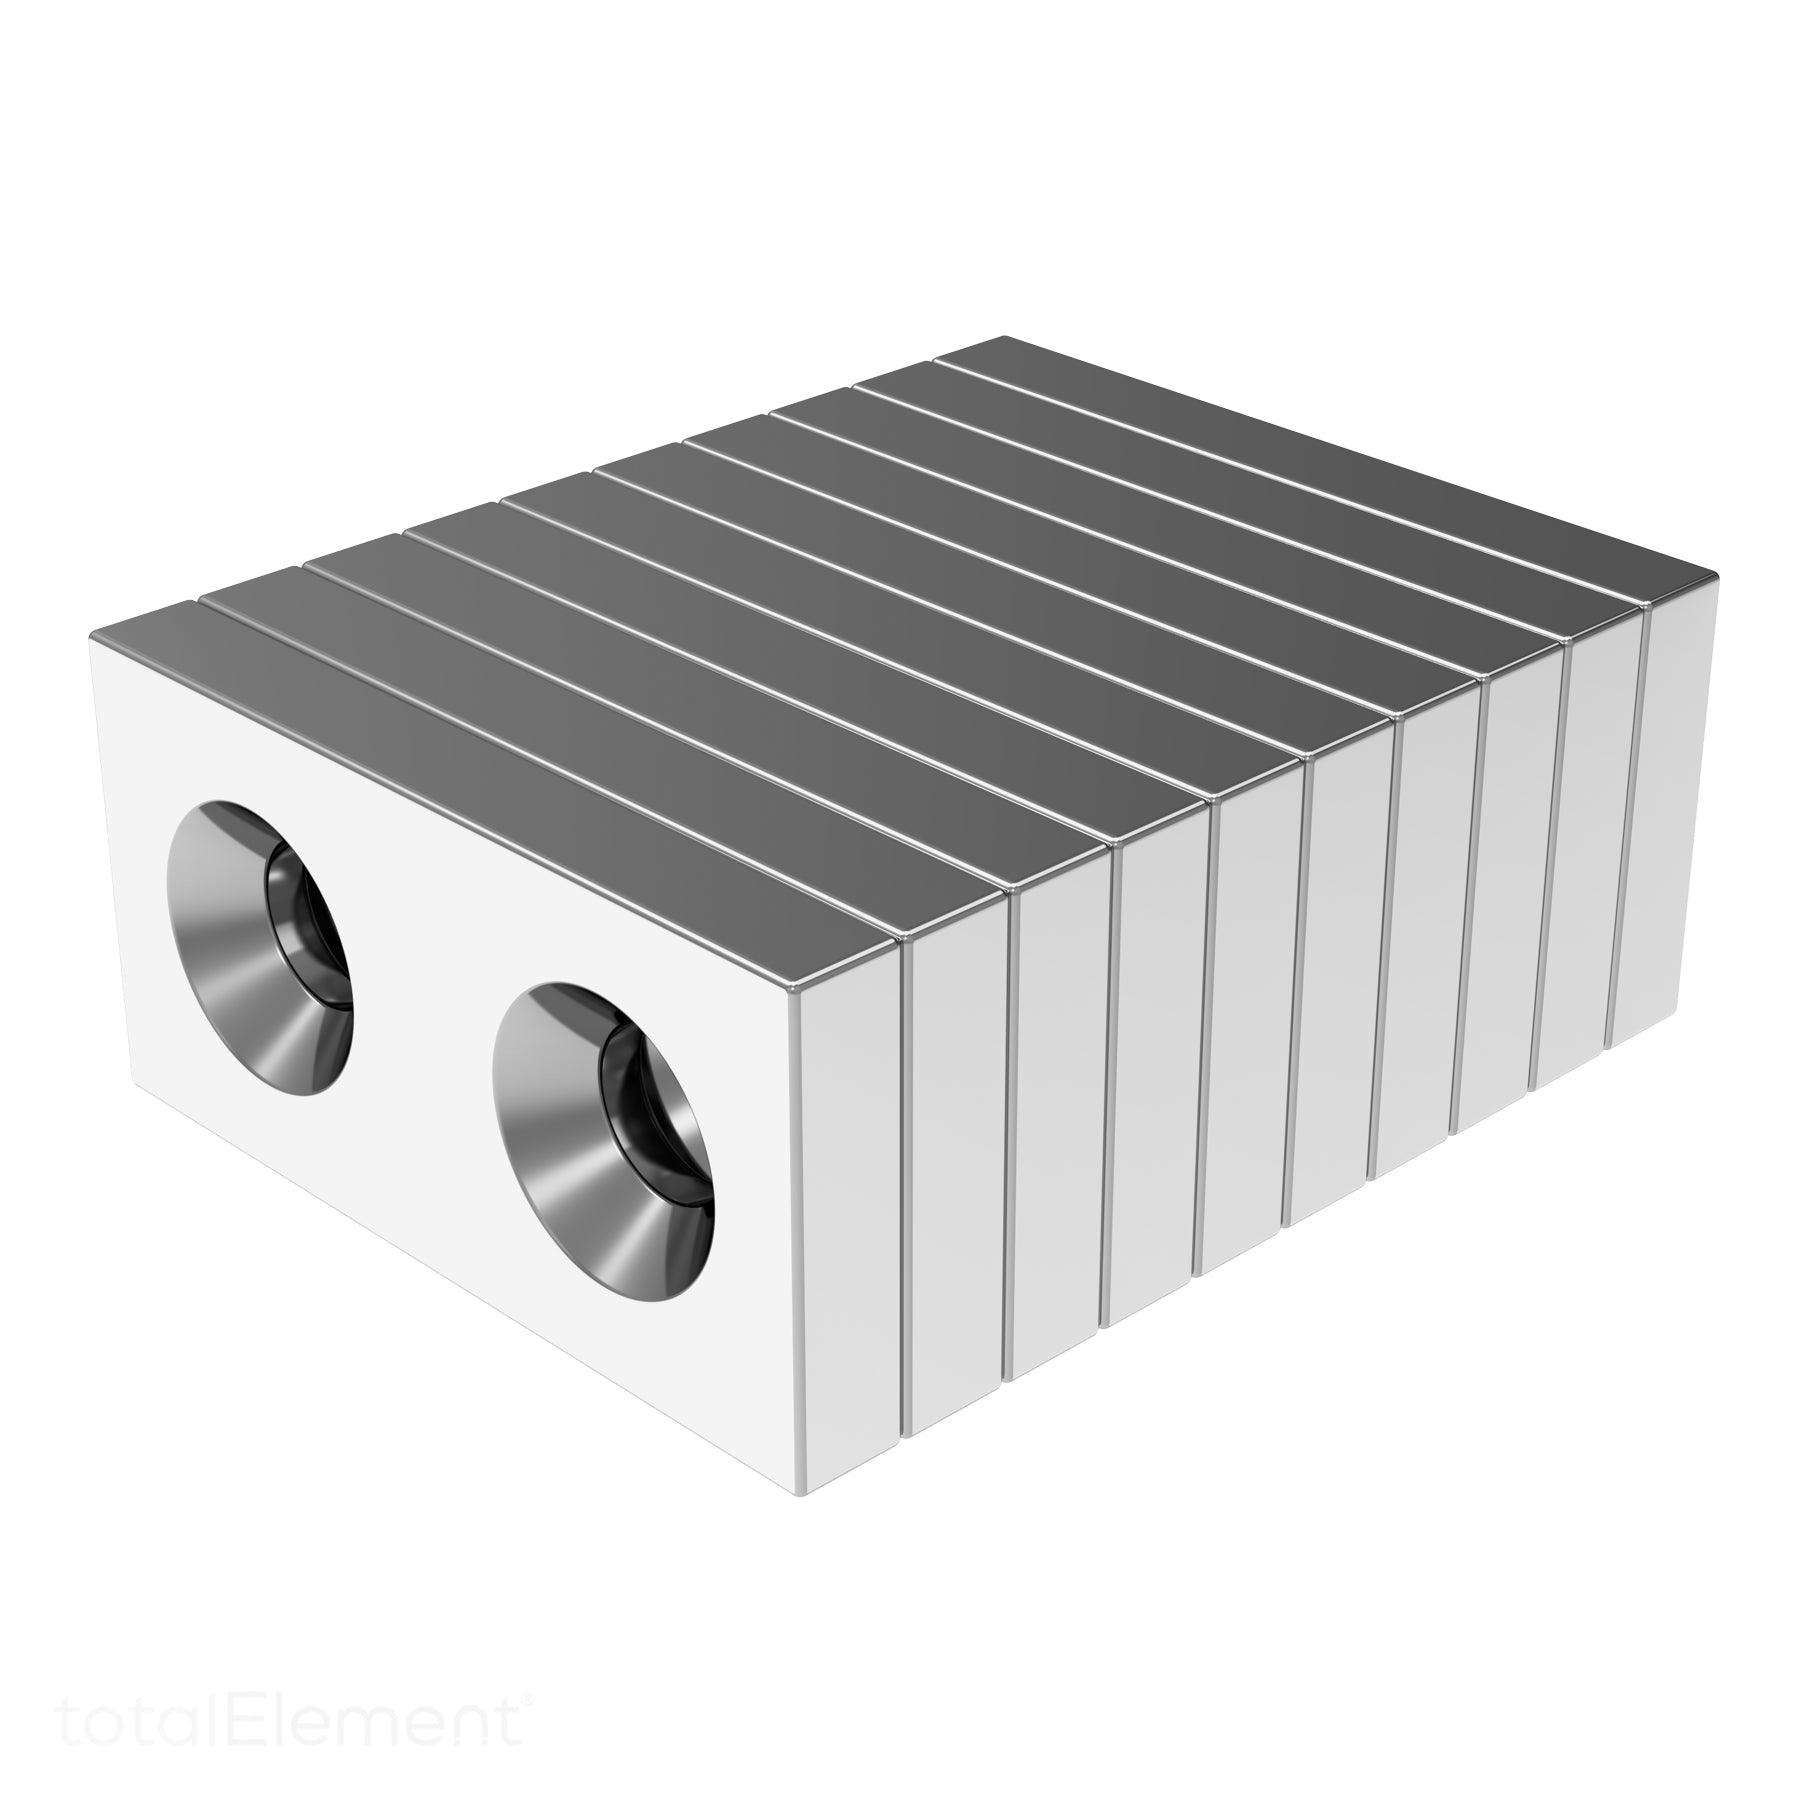 1 x 1/2 x 1/8 inch Neodymium Rare Earth Double Countersunk Block Magnets N52 (10 Pack)